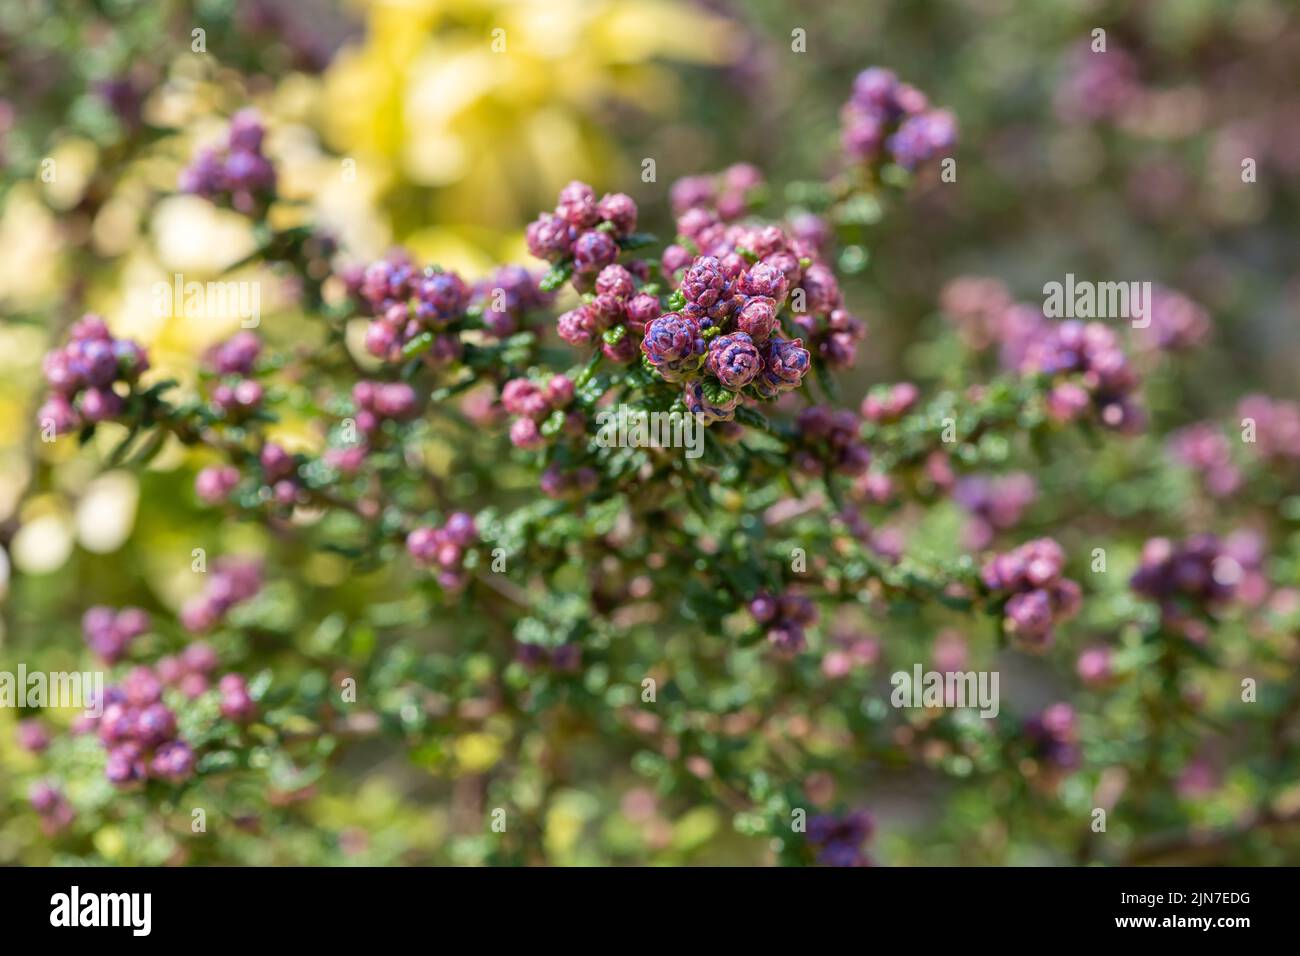 Close up of buds on a California lilac (ceanothus) bush Stock Photo